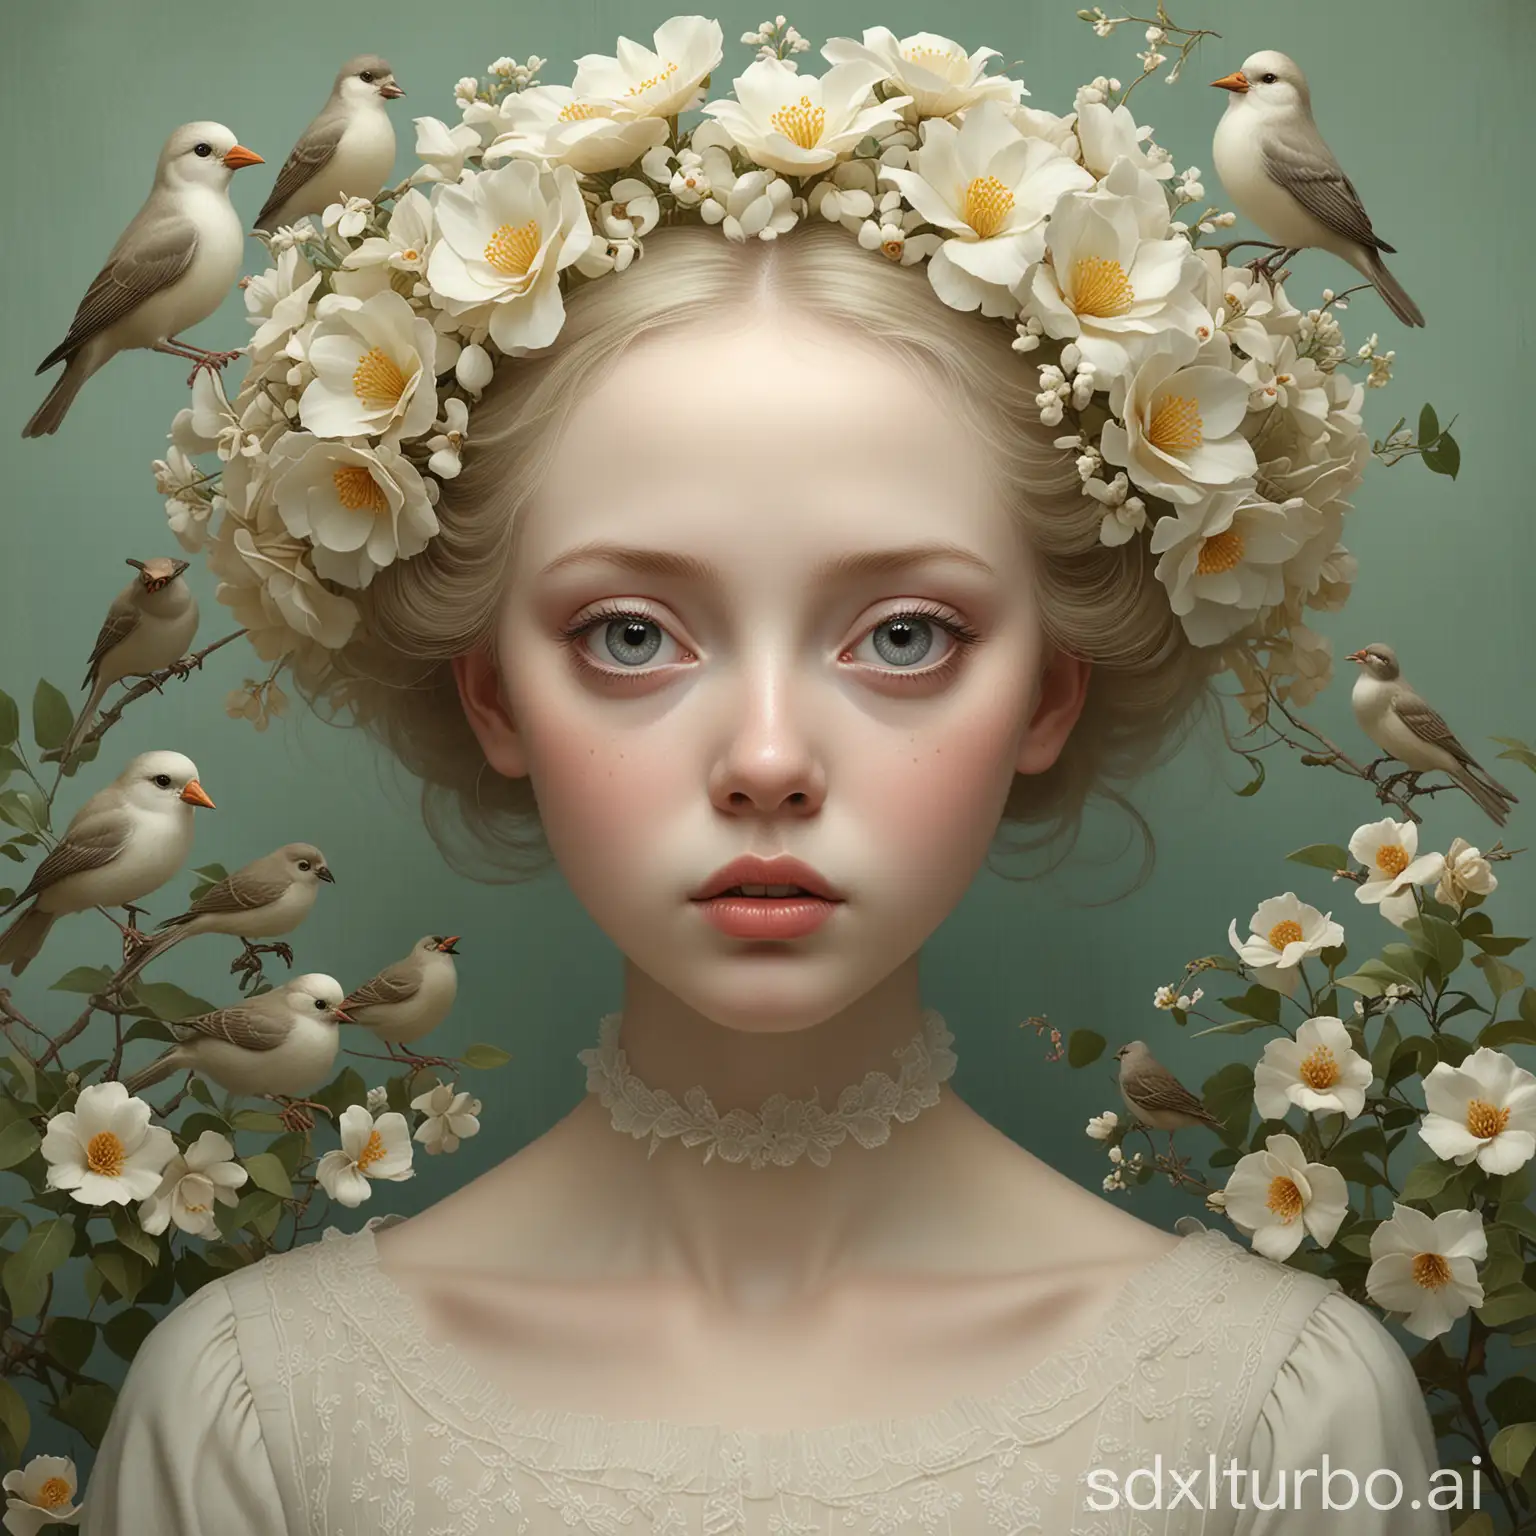 Oil painting, portrait of a girl, ghostly pale complexion, round eyes, diminutive nose and mouth, surrounding ambience of birds and floral elements, pop surrealism genre, Ray Caesar influence, vintage touch, light grain texture, soft hues, indirect lighting, octane rendering, 3D effect, digital painting, dreamlike atmosphere, volumetric light, delicate surrealism,